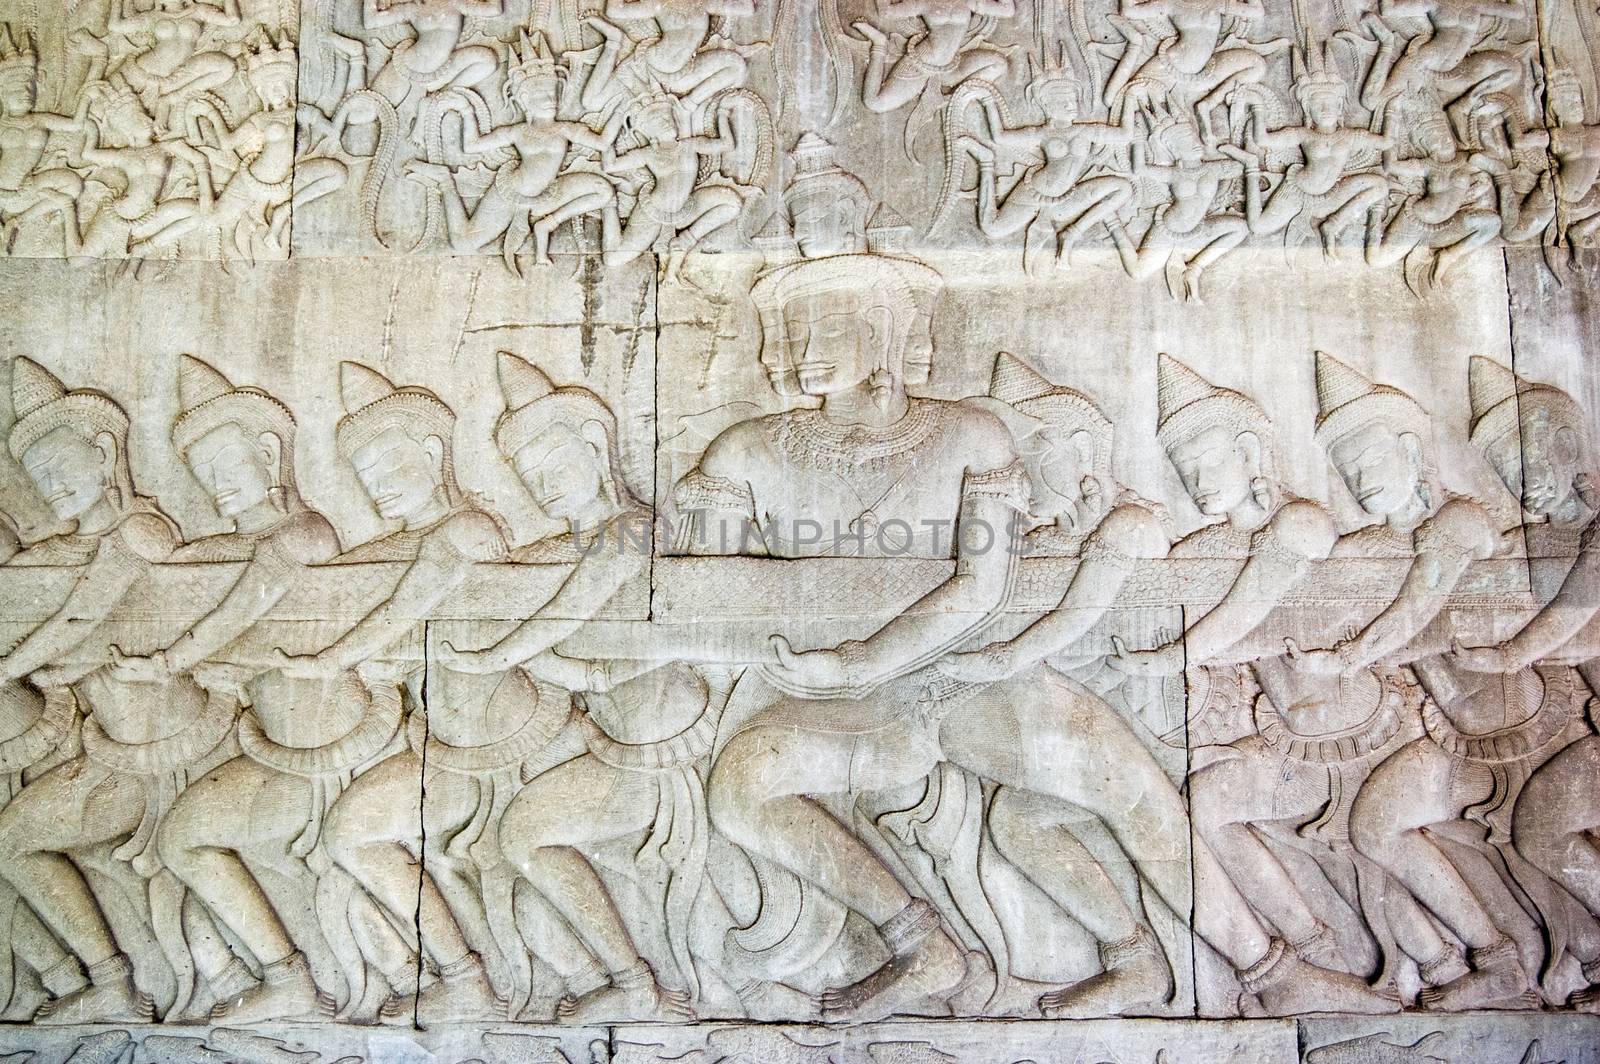 Ancient Khmer bas relief carving showing a row of Hindu gods, devas, pulling on the snake Vasuki. Legend of the churning of the Ocean of Milk, Angkor Wat temple, Cambodia.